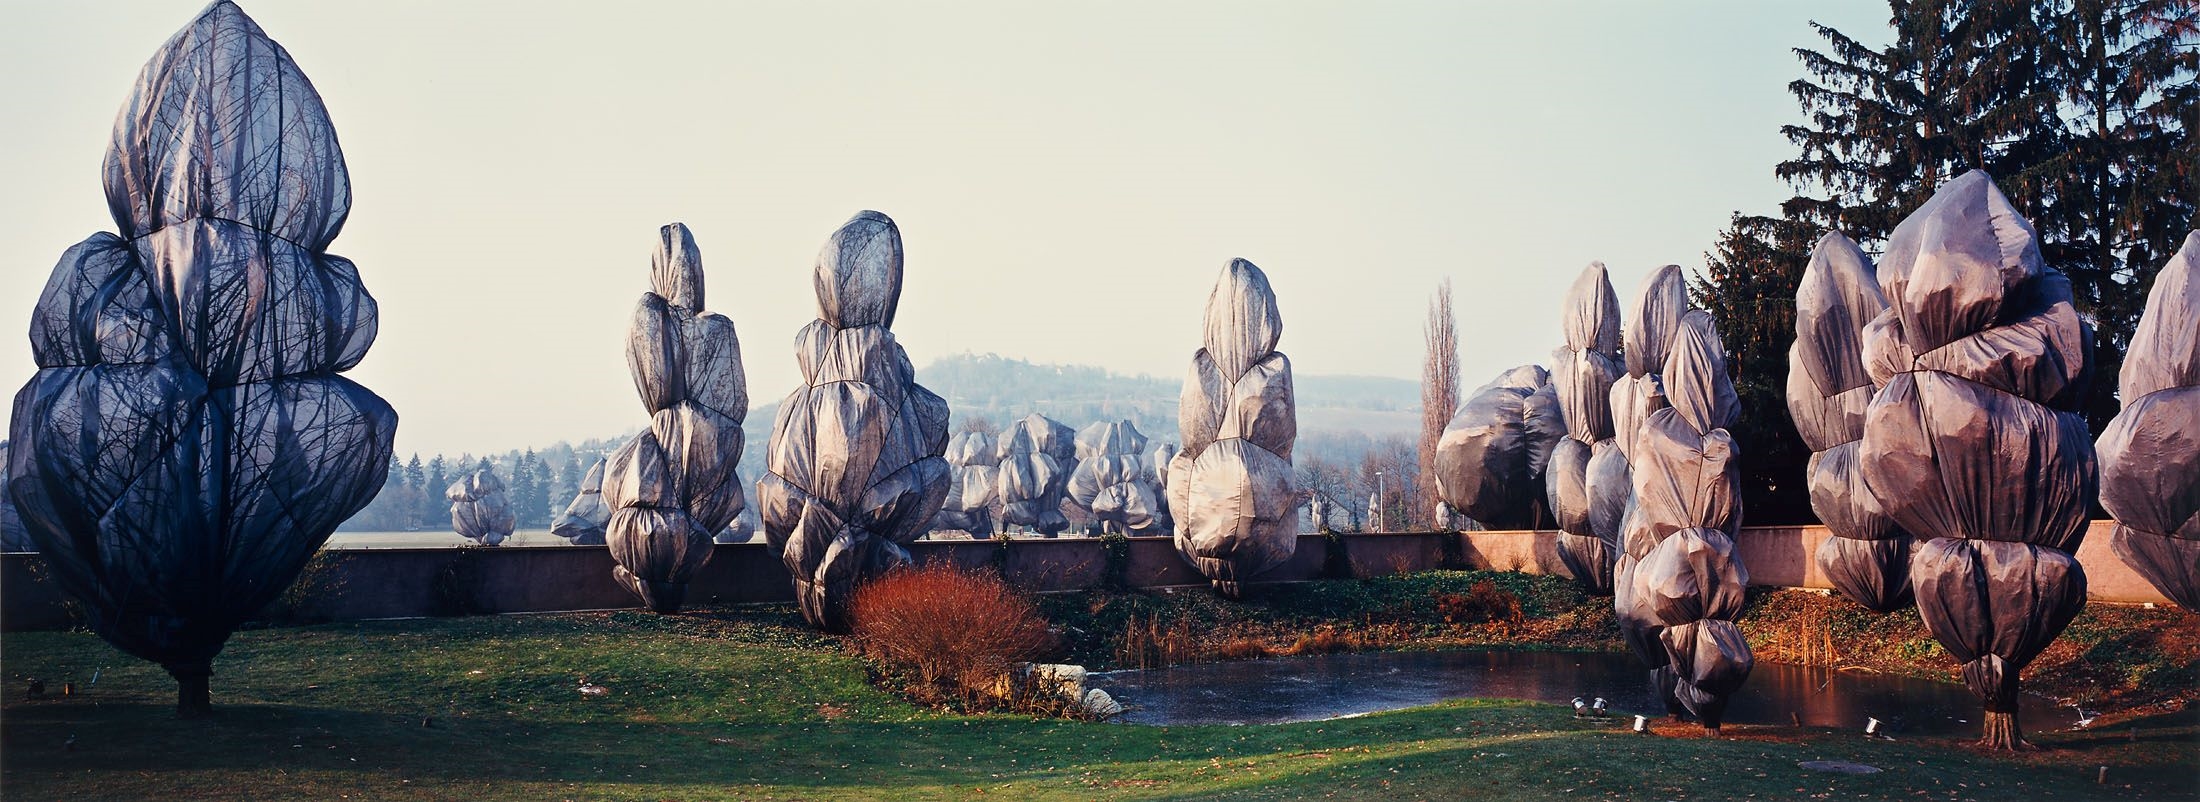 Christo and Jeanne-Claude: Wrapped Trees, Fondation Beyeler and Berower Parc, Riehen, Switzerland by Wolfgang Volz, 1997/1998